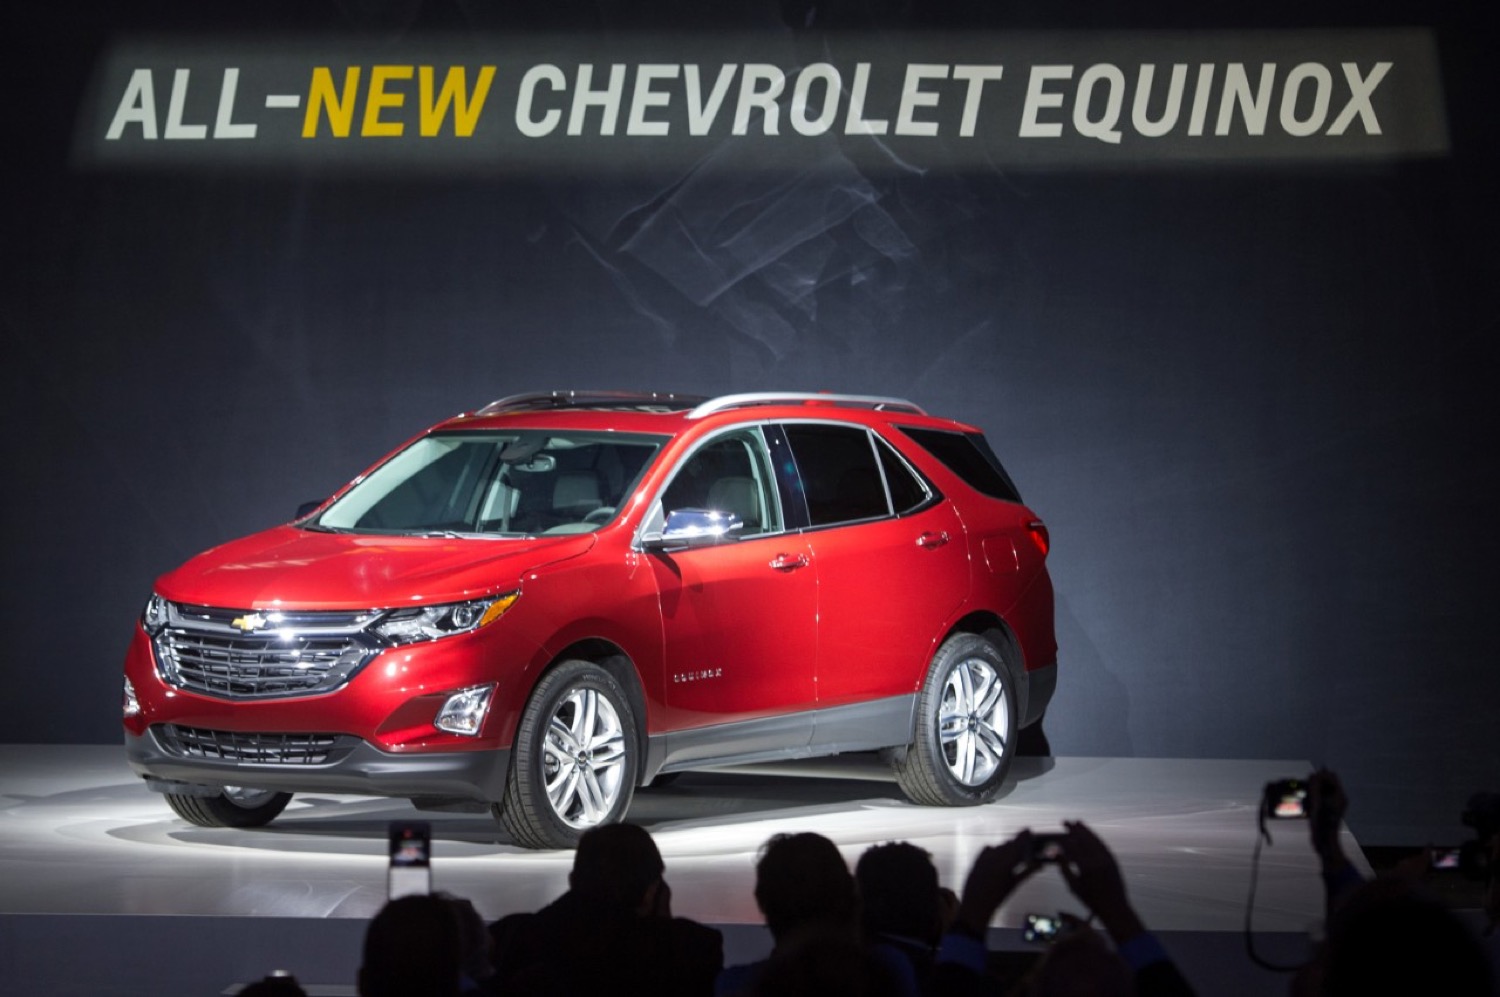 2018 Chevrolet Equinox Order Guide | GM Authority